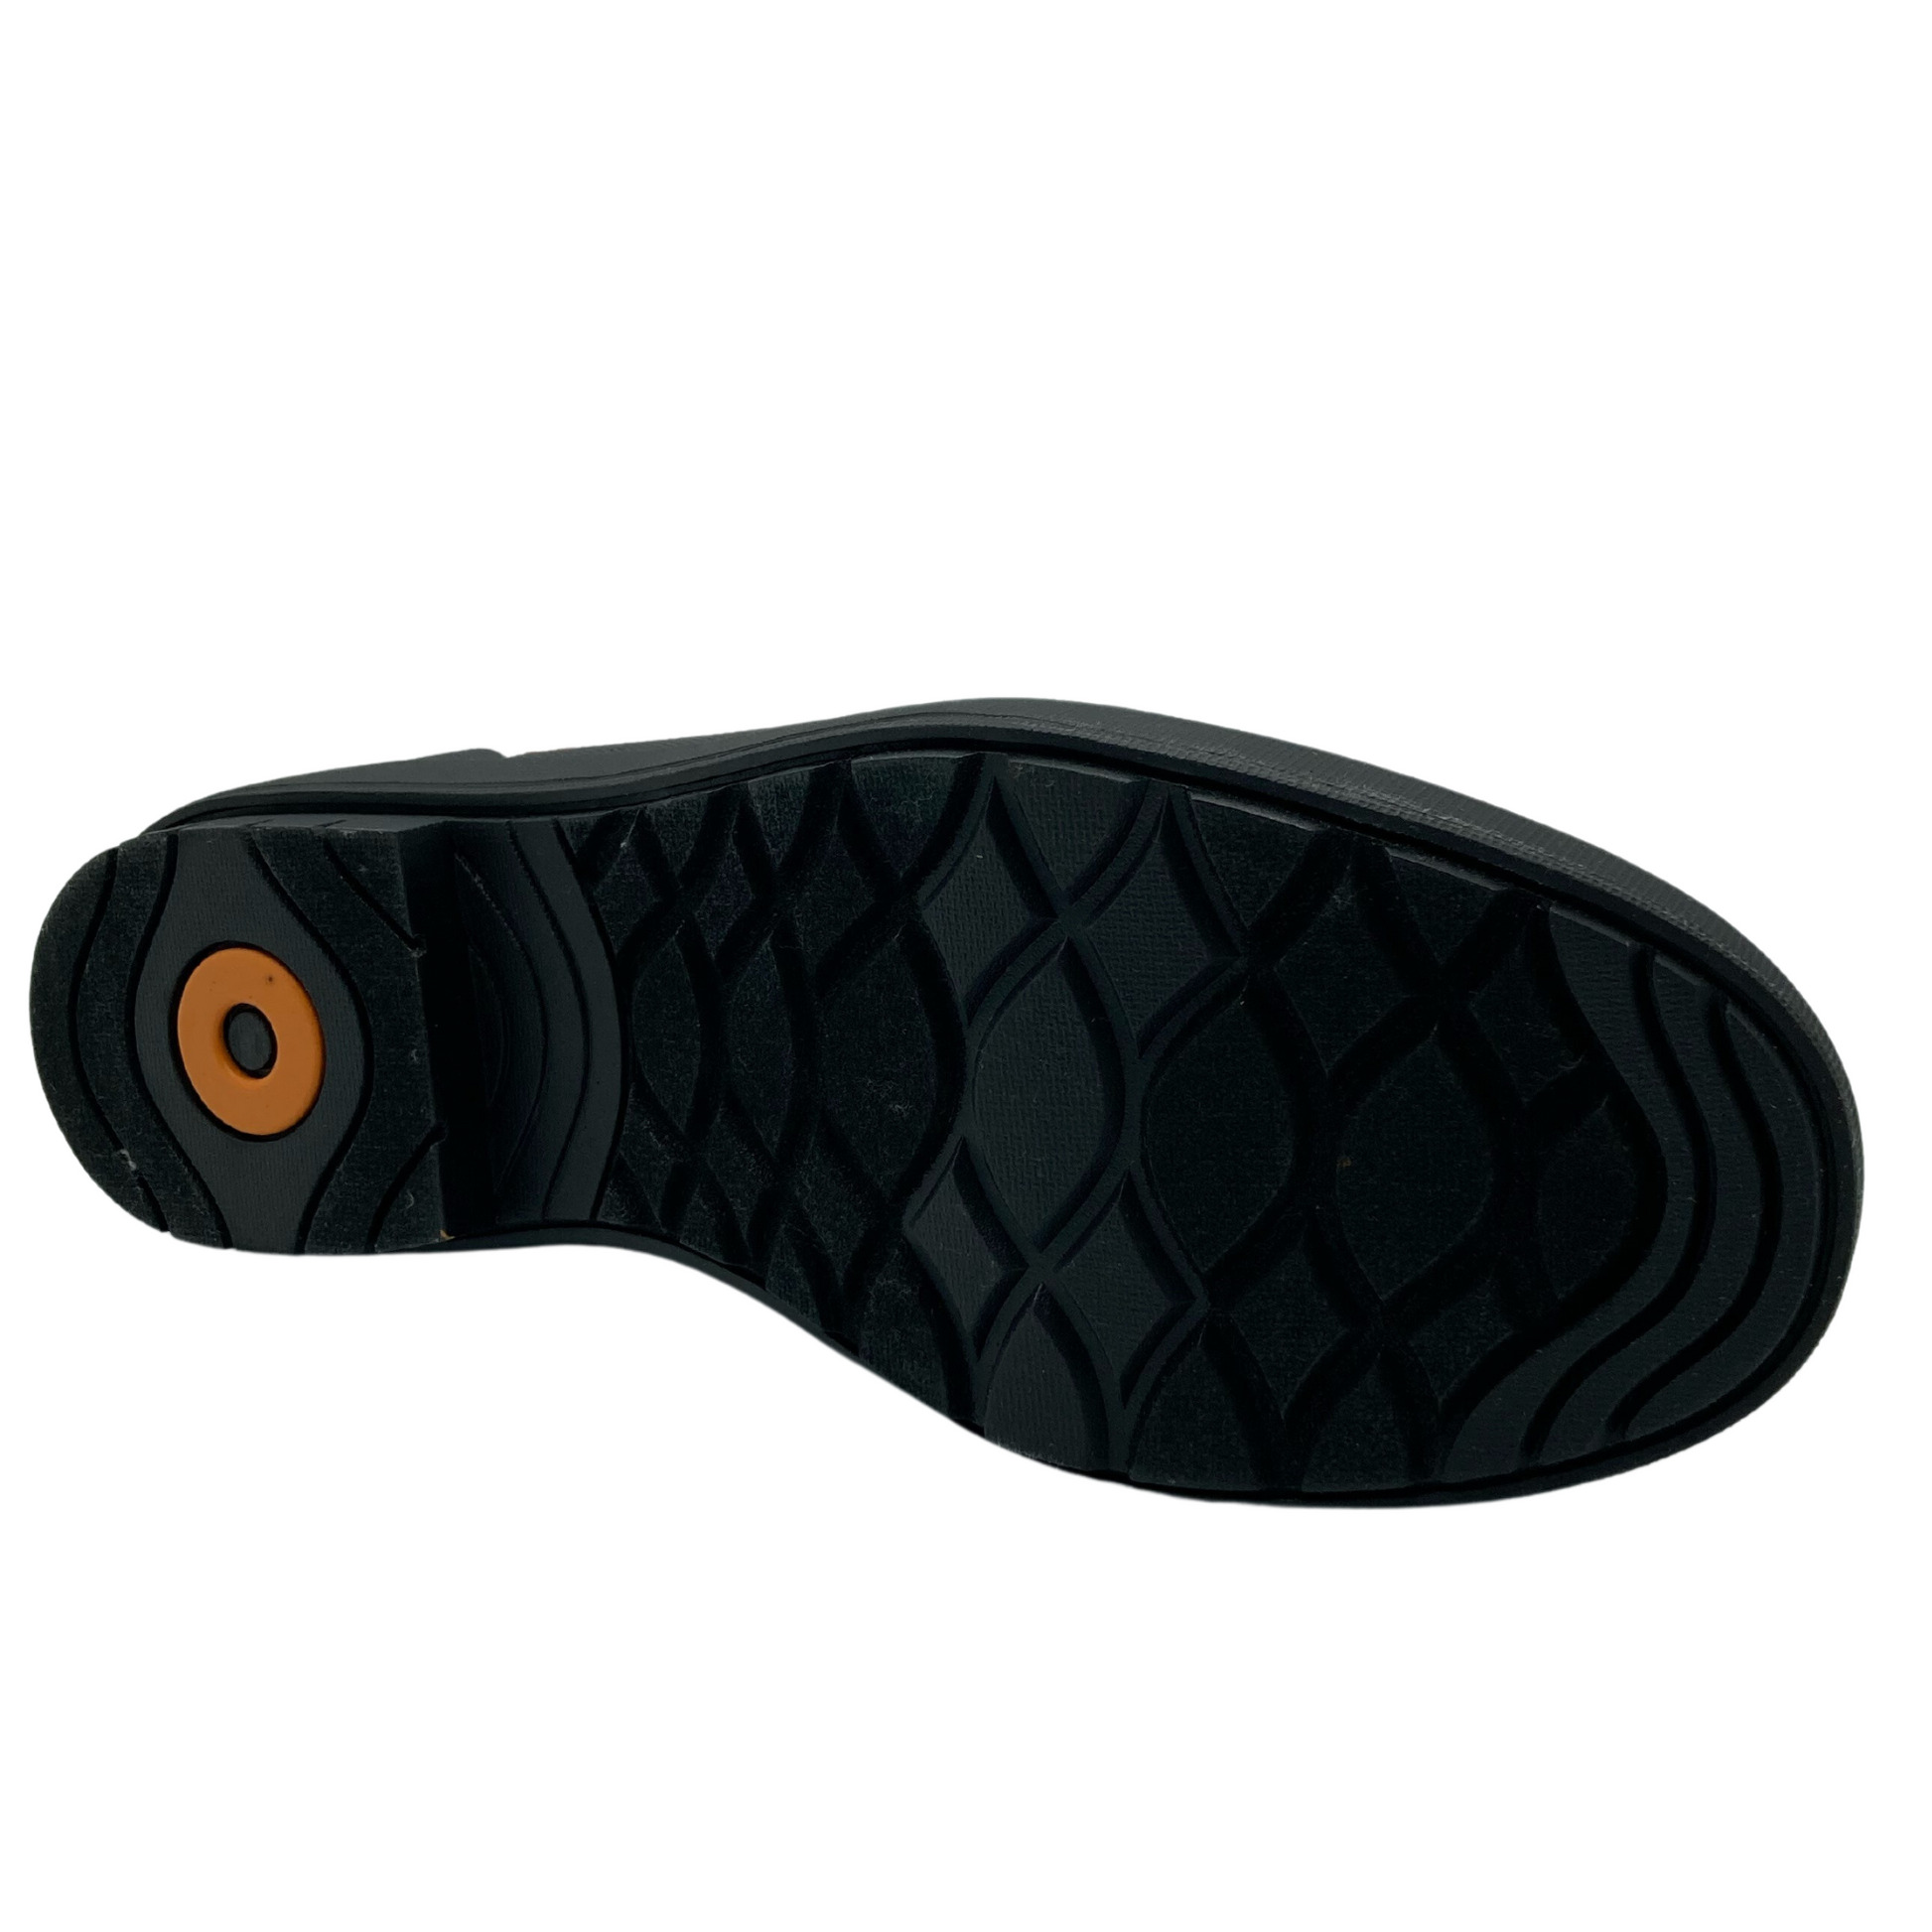 Bottom view of short rain boot with black rubber outsole